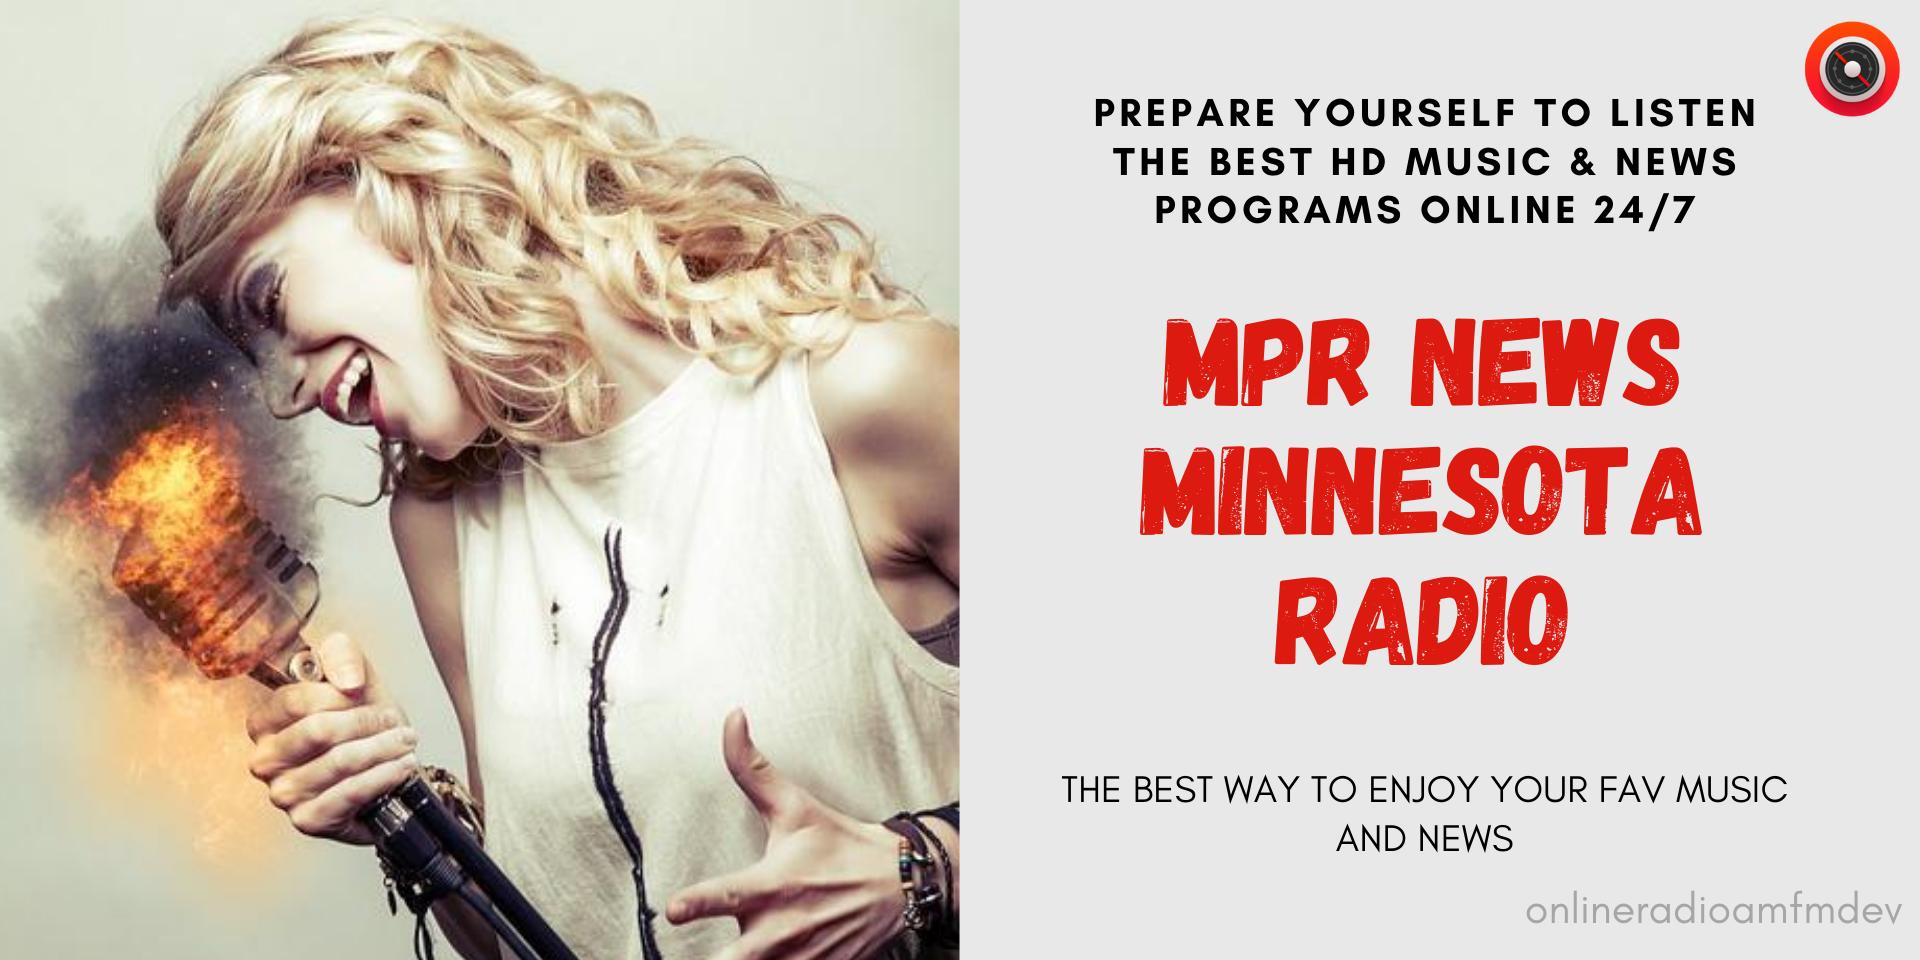 MPR News Minnesota Public Radio for Android - APK Download